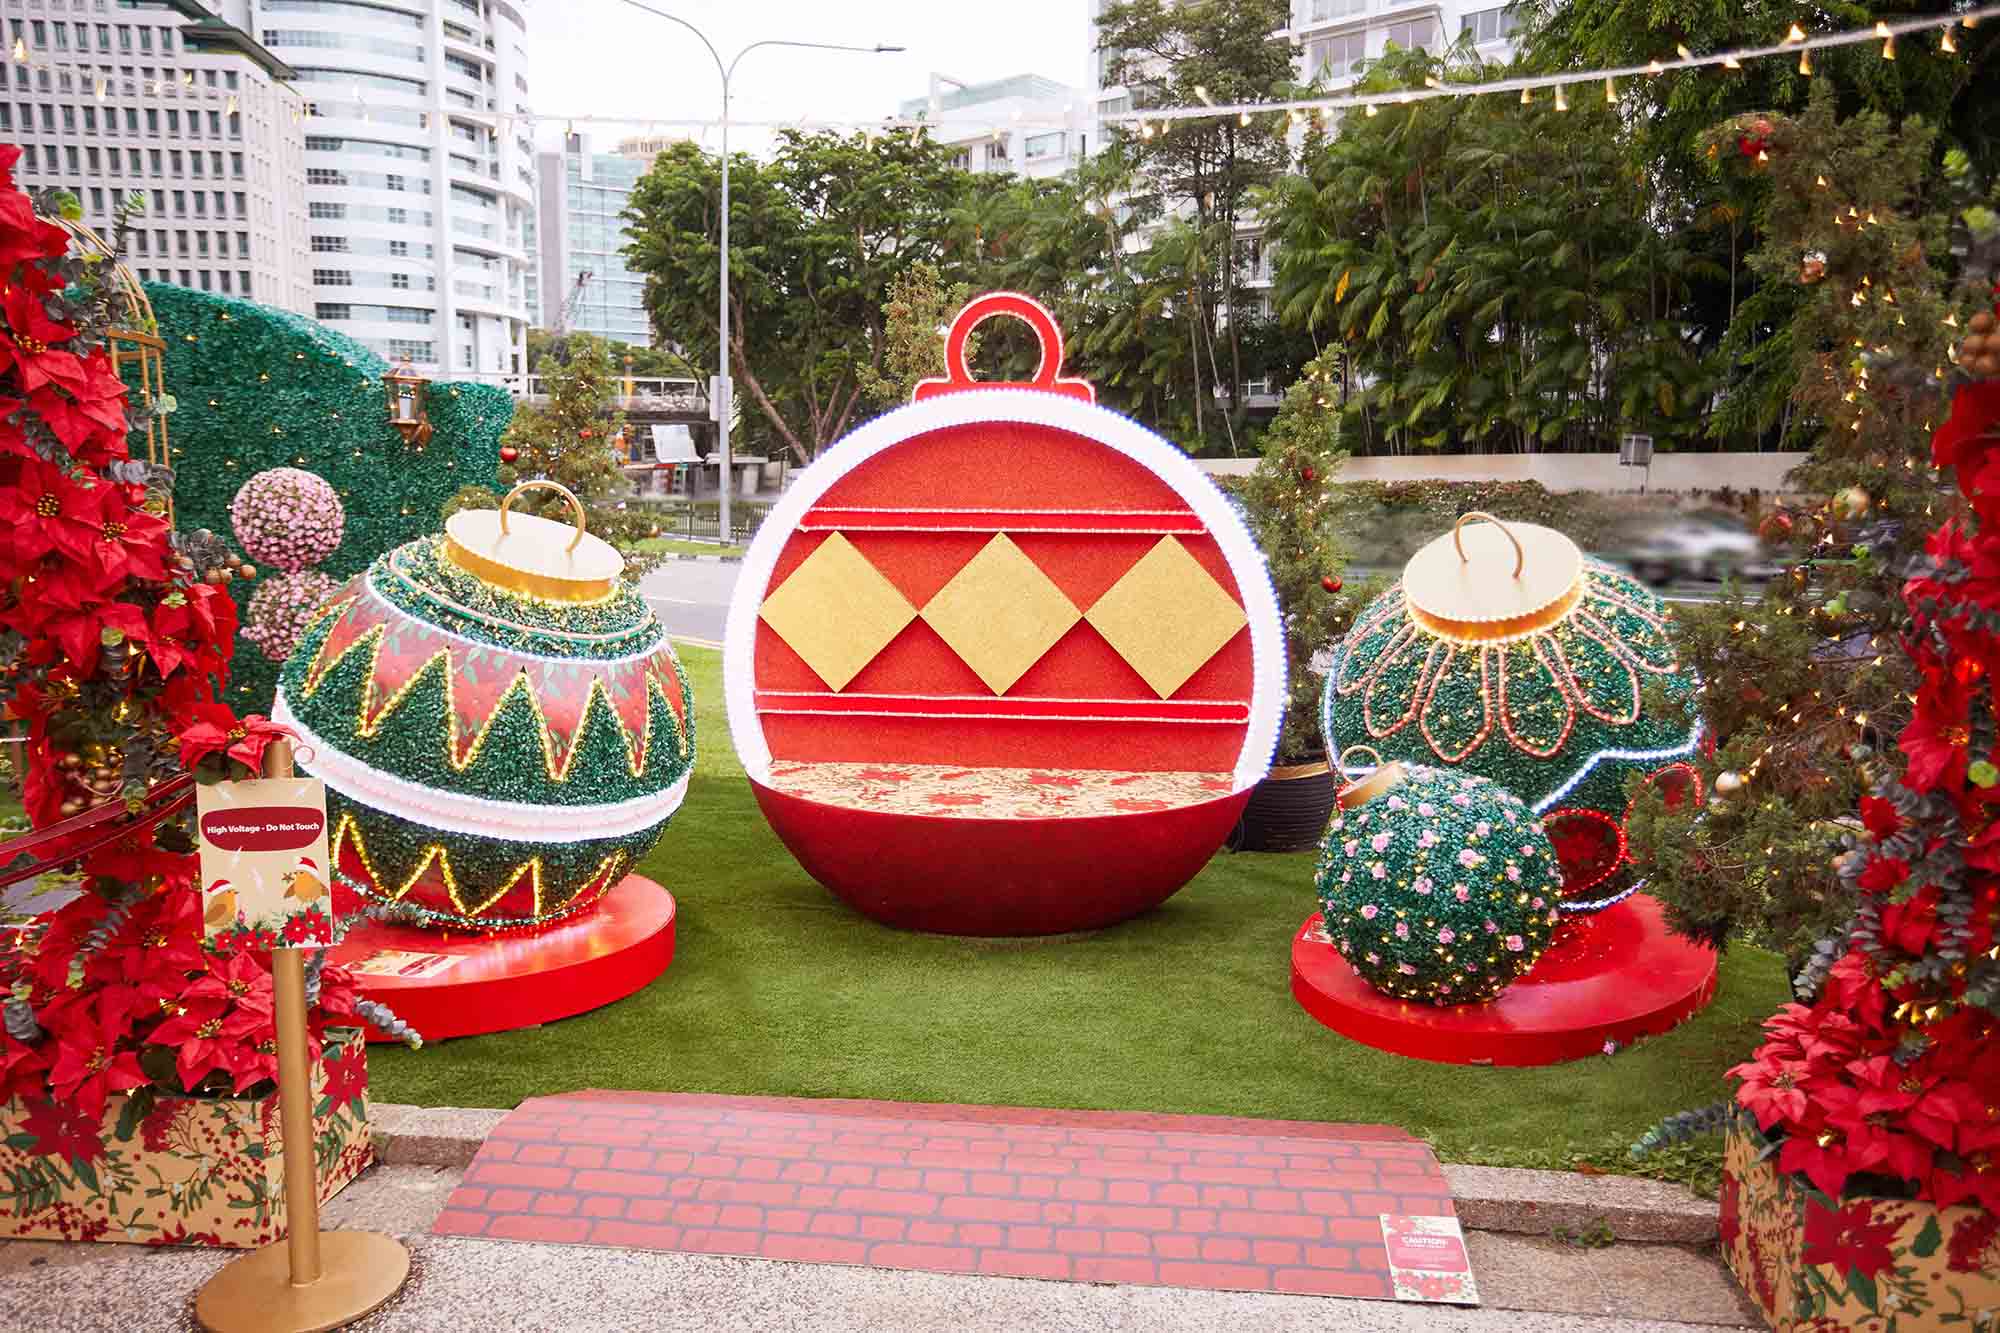 Shopping malls across Malaysia get into the Christmas spirit with festive  decorations, charitable acts